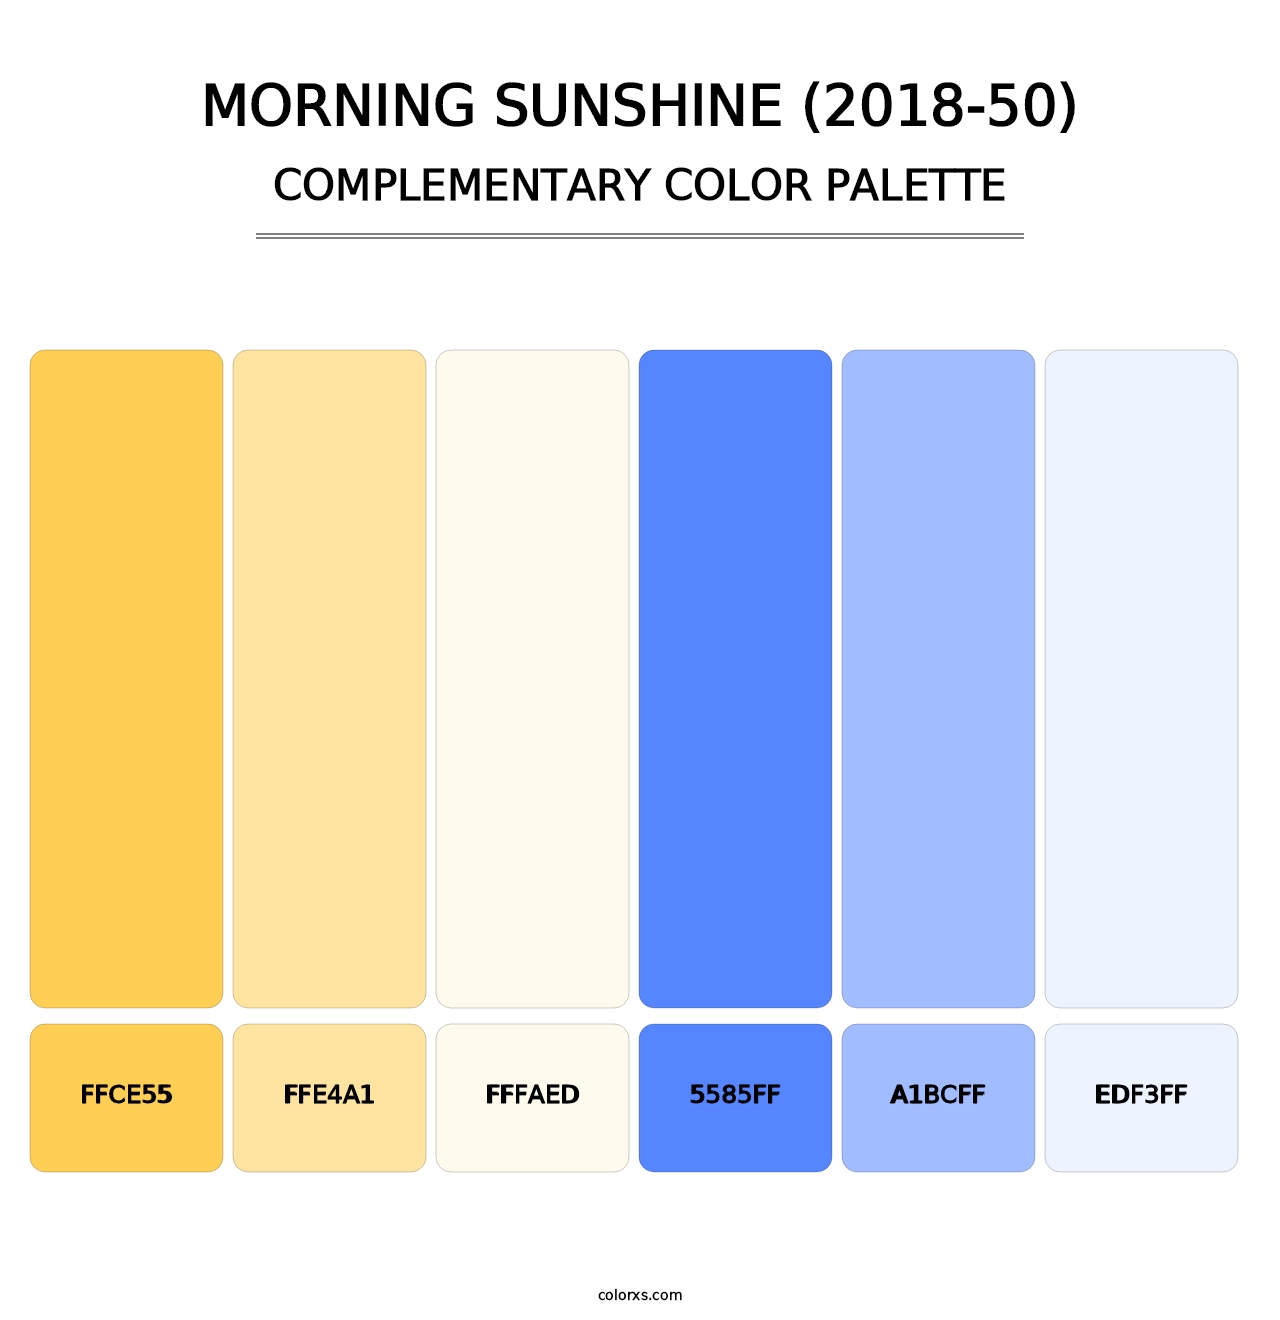 Morning Sunshine (2018-50) - Complementary Color Palette